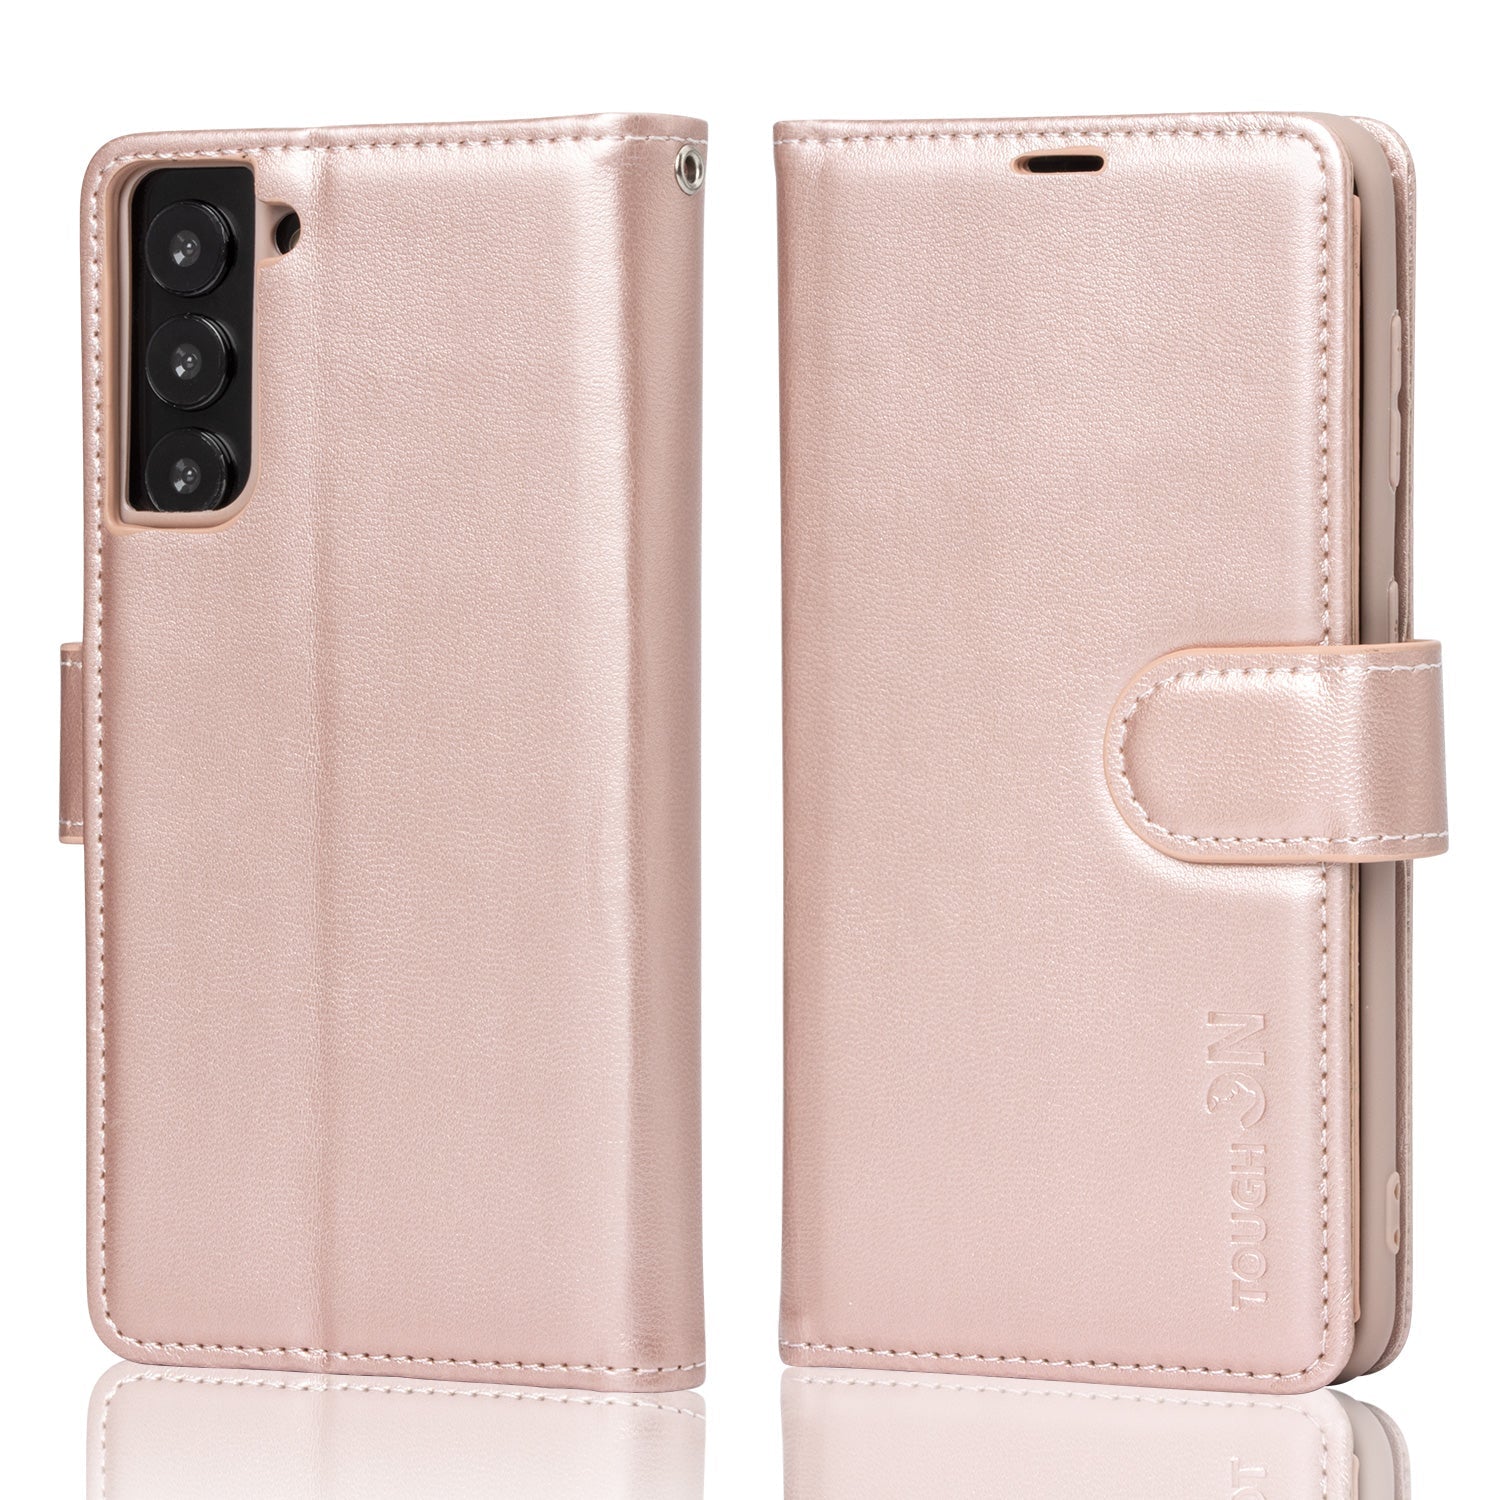 Tough On Samsung Galaxy S21 Flip Wallet Leather Case-2